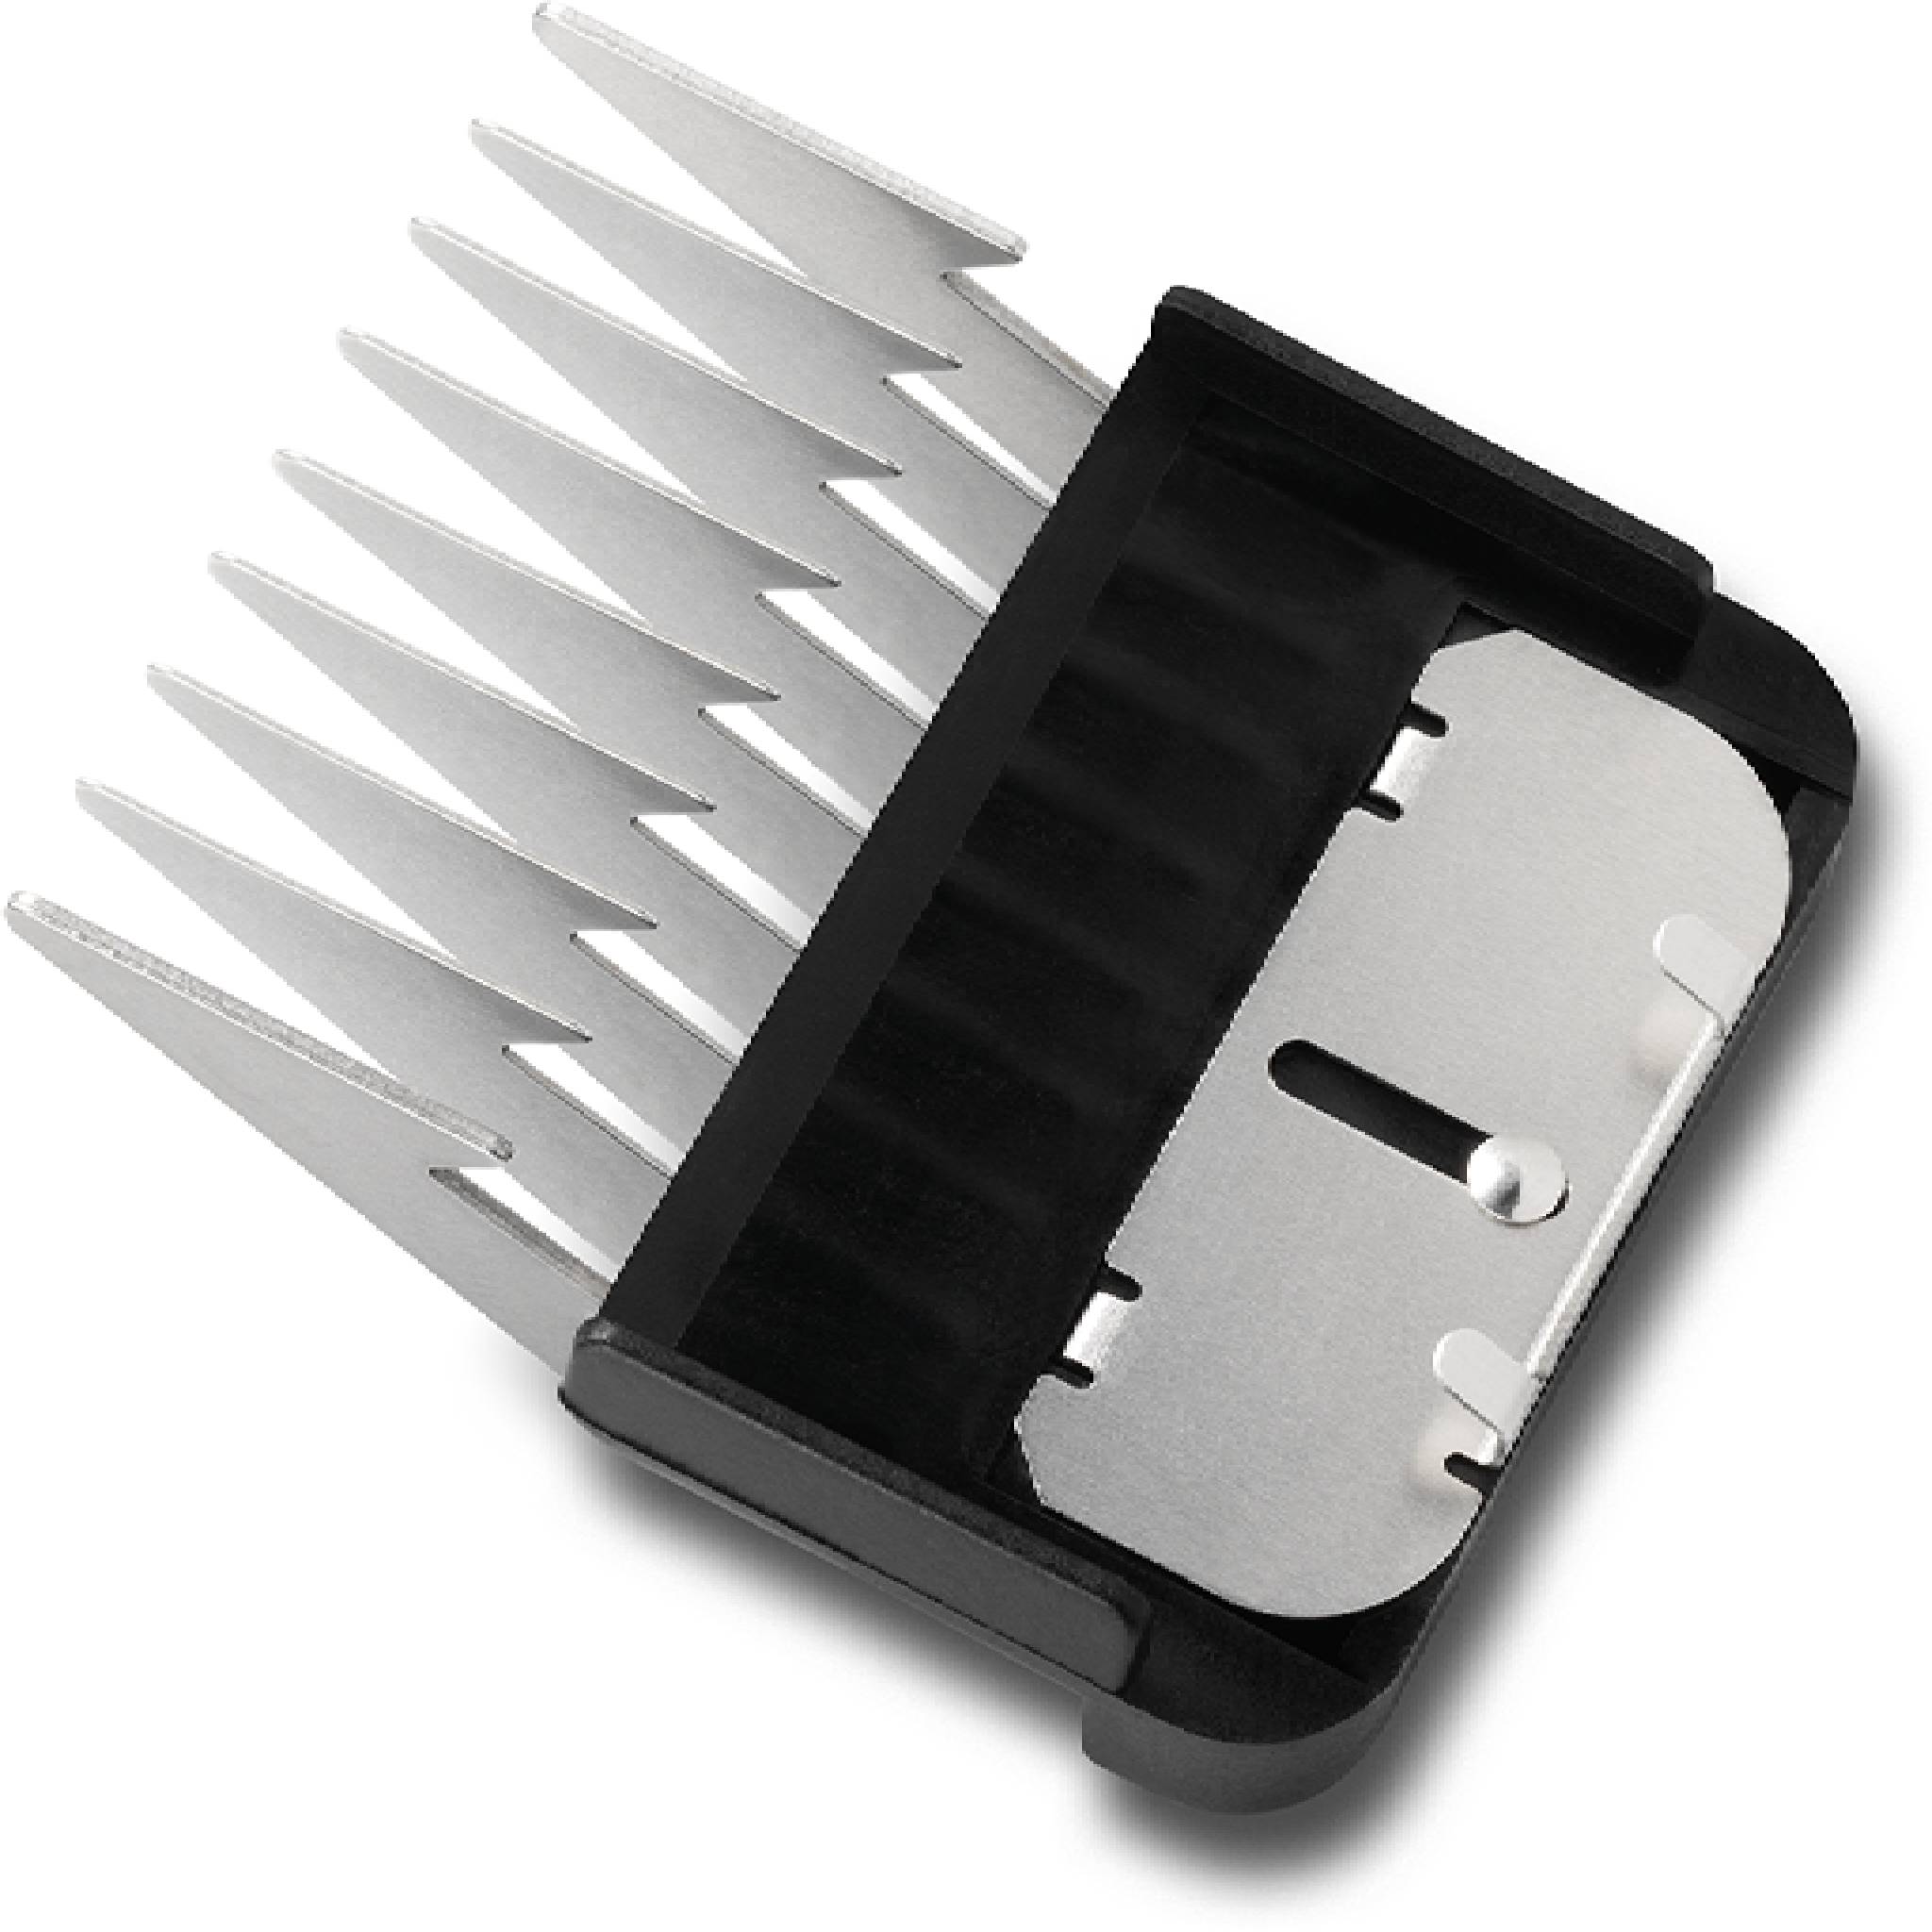 Andis Universal Stainless Steel Combs 8-Piece Set